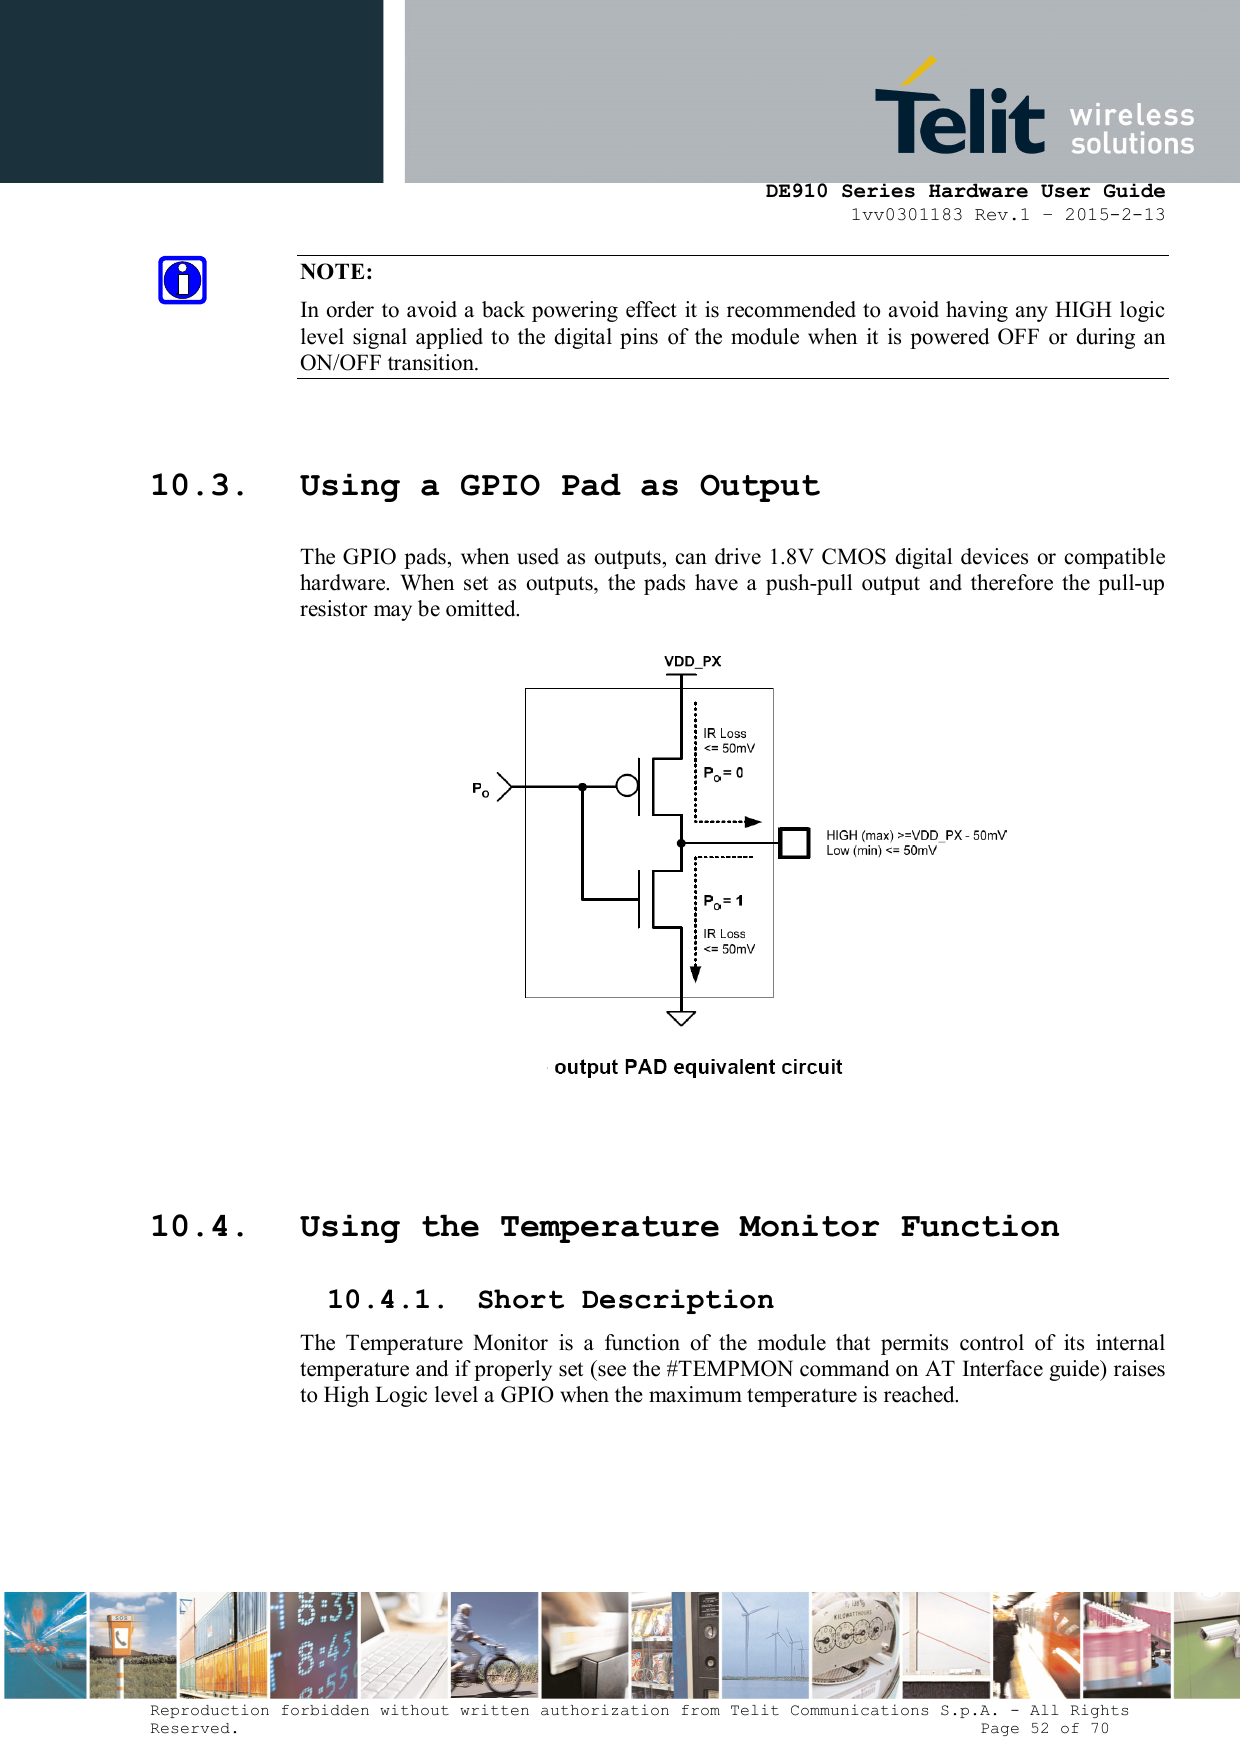      DE910 Series Hardware User Guide 1vv0301183 Rev.1 – 2015-2-13 Reproduction forbidden without written authorization from Telit Communications S.p.A. - All Rights Reserved.                                                                          Page 52 of 70 NOTE: In order to avoid a back powering effect it is recommended to avoid having any HIGH logic level  signal  applied  to the  digital pins  of the  module  when  it  is powered OFF  or during  an ON/OFF transition.  10.3. Using a GPIO Pad as Output The GPIO pads, when used as outputs, can drive 1.8V CMOS digital devices or compatible hardware.  When  set  as  outputs,  the  pads  have  a  push-pull  output  and  therefore  the  pull-up resistor may be omitted.    10.4. Using the Temperature Monitor Function 10.4.1. Short Description The  Temperature  Monitor  is  a  function  of  the  module  that  permits  control  of  its  internal temperature and if properly set (see the #TEMPMON command on AT Interface guide) raises to High Logic level a GPIO when the maximum temperature is reached. 